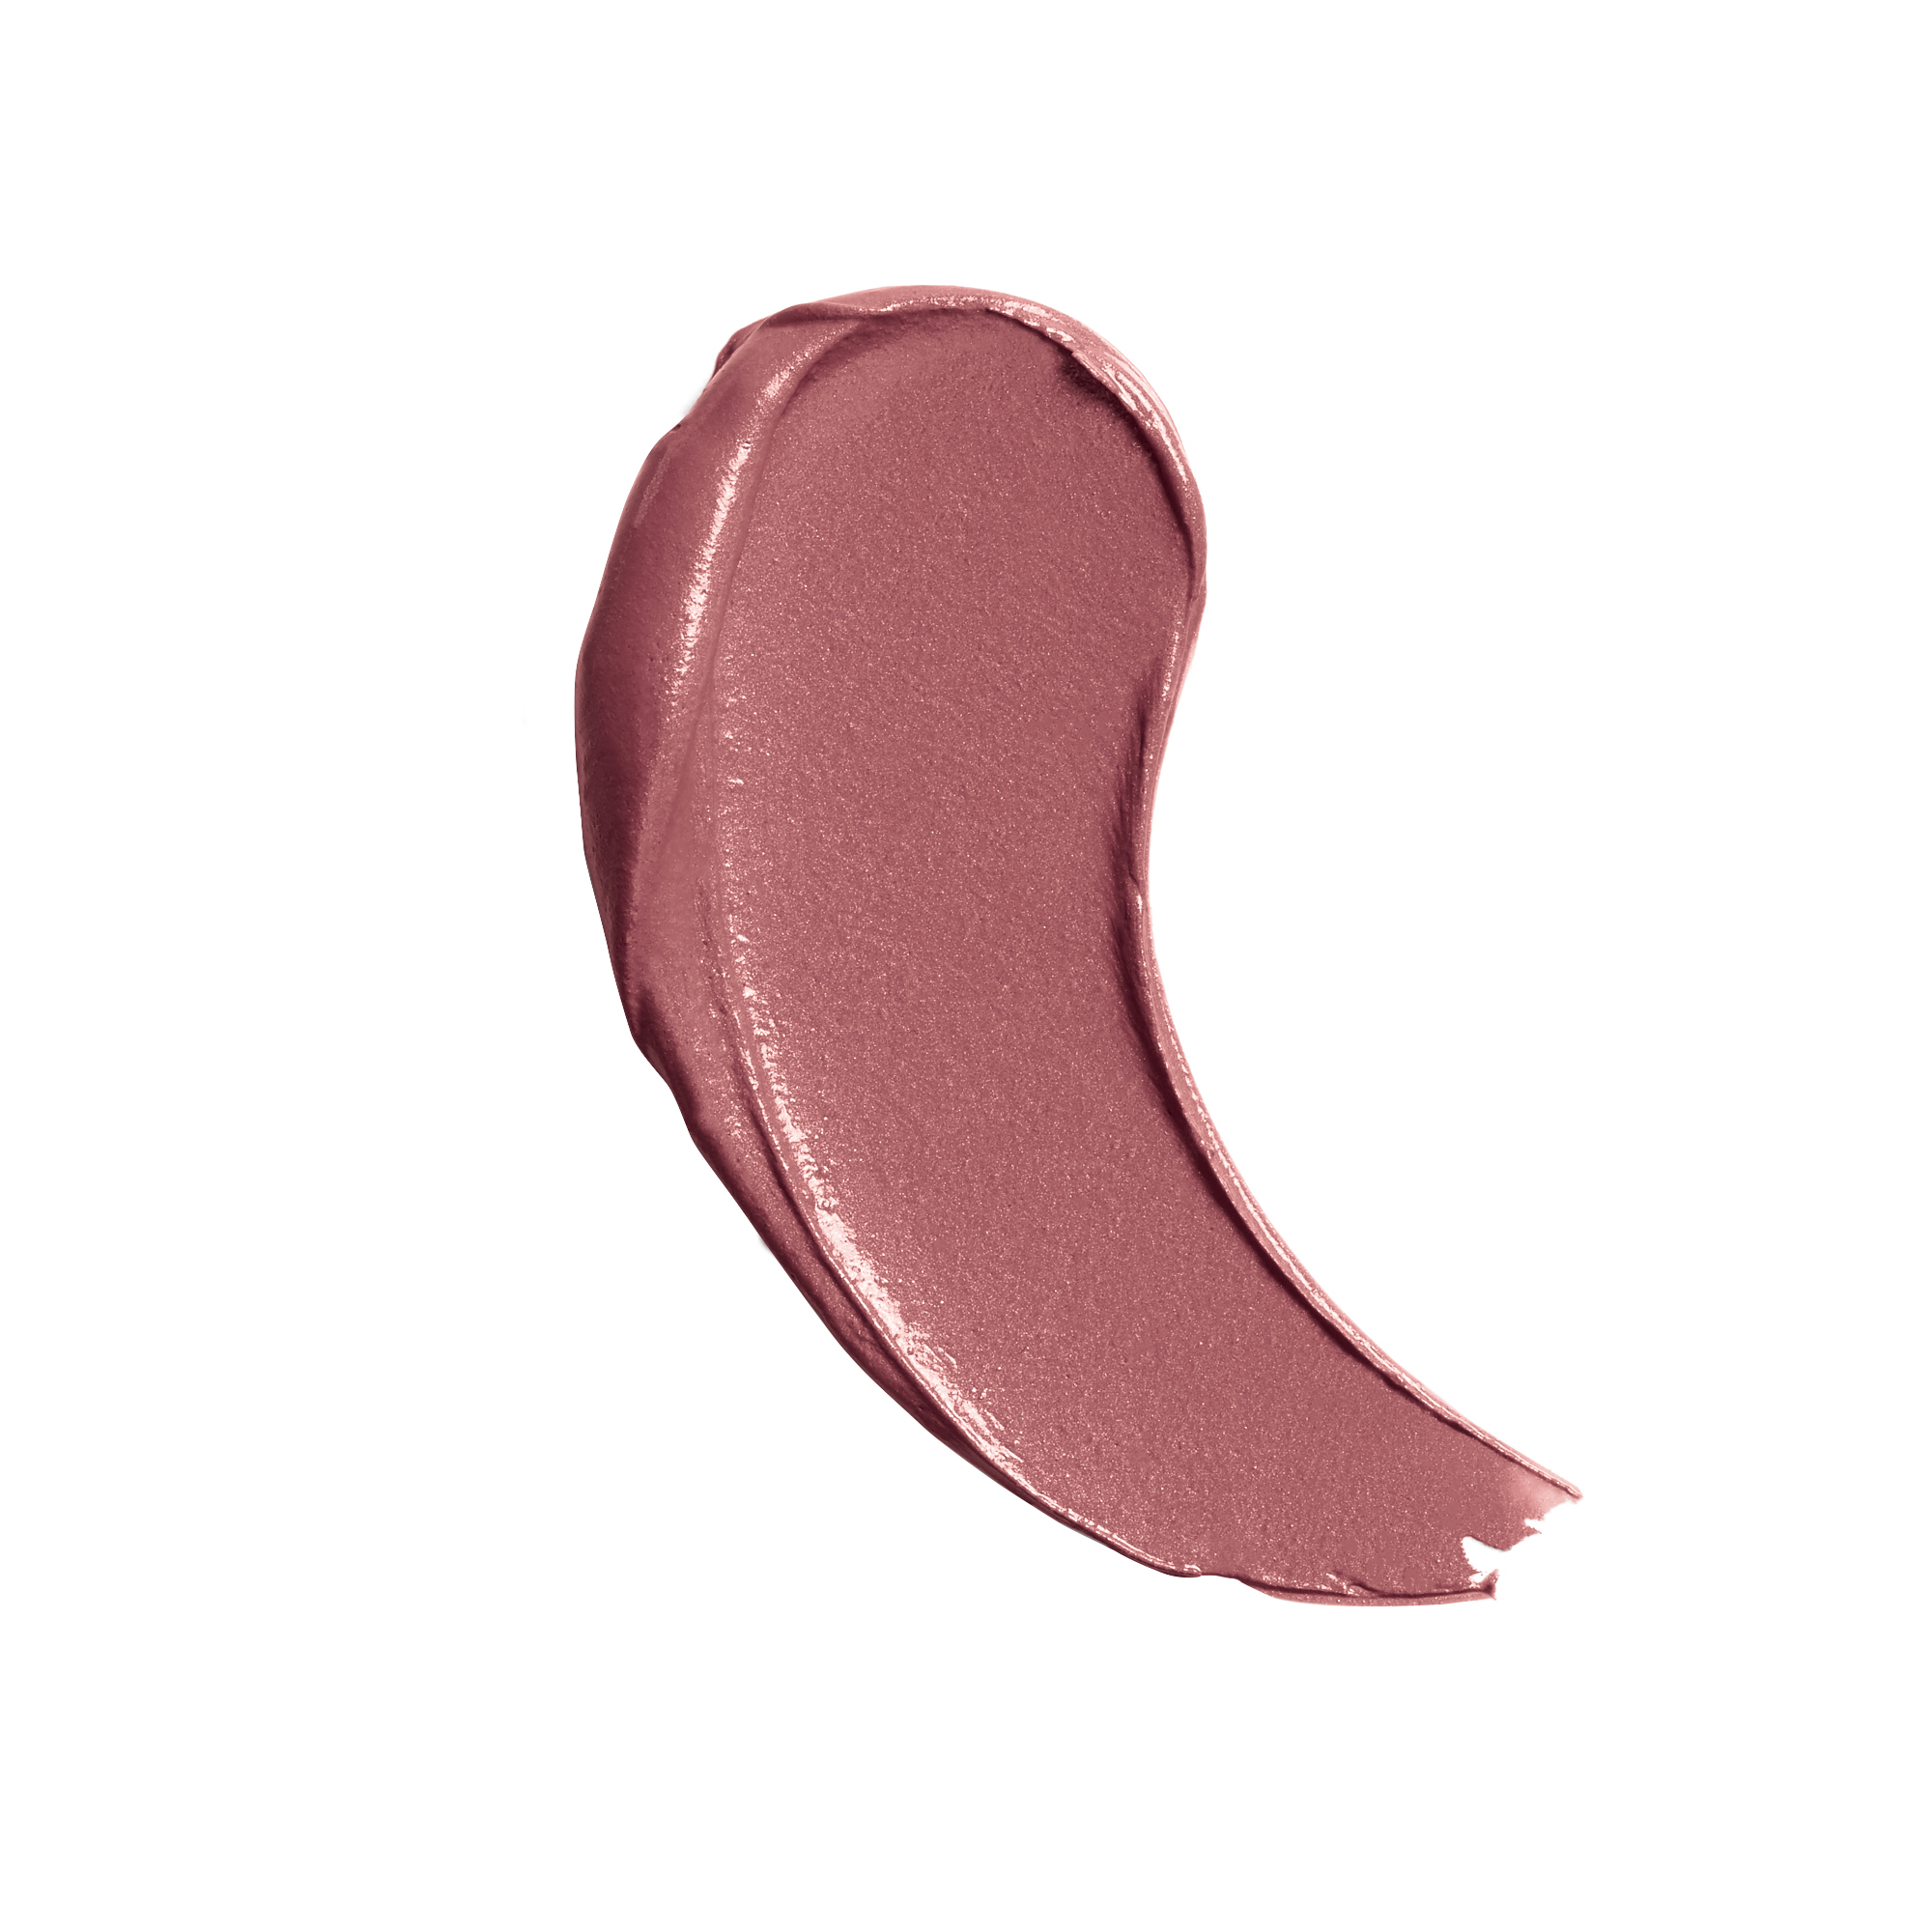 COVERGIRL Continuous Color Lipstick, 430 Bistro Burgundy, 0.13 oz, Moisturizing Lipstick, Long Lasting Lipstick, Extended Palette of Shades, Keeps Lips Soft - image 2 of 5